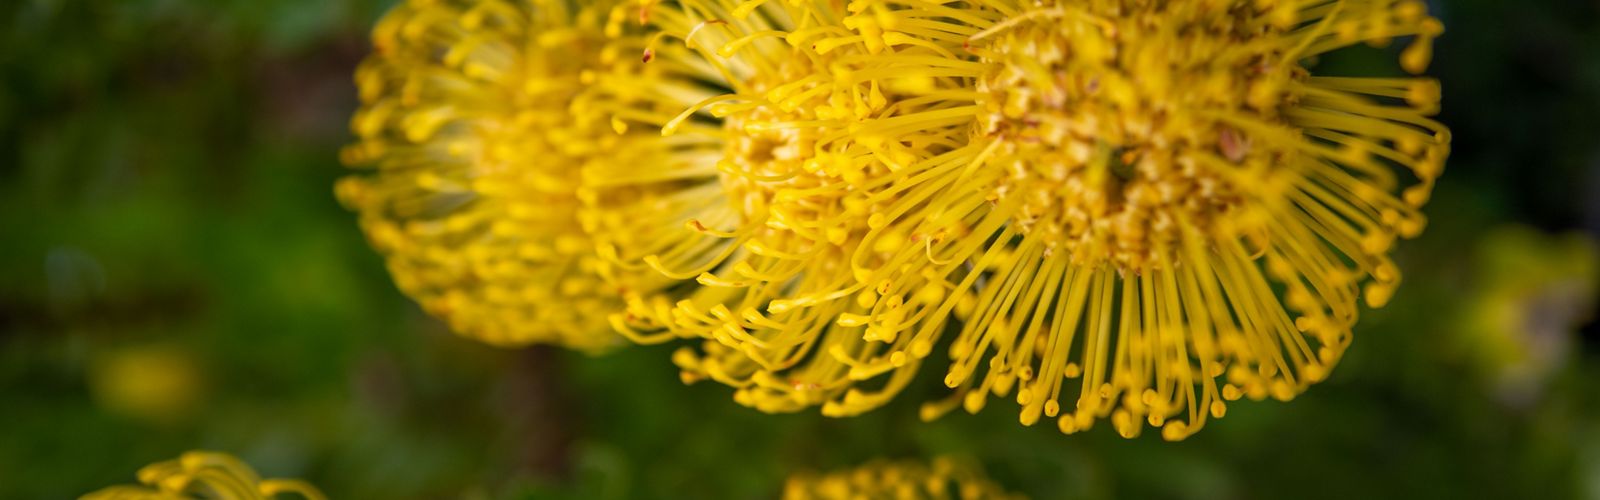 A closeup view of a yellow flower.